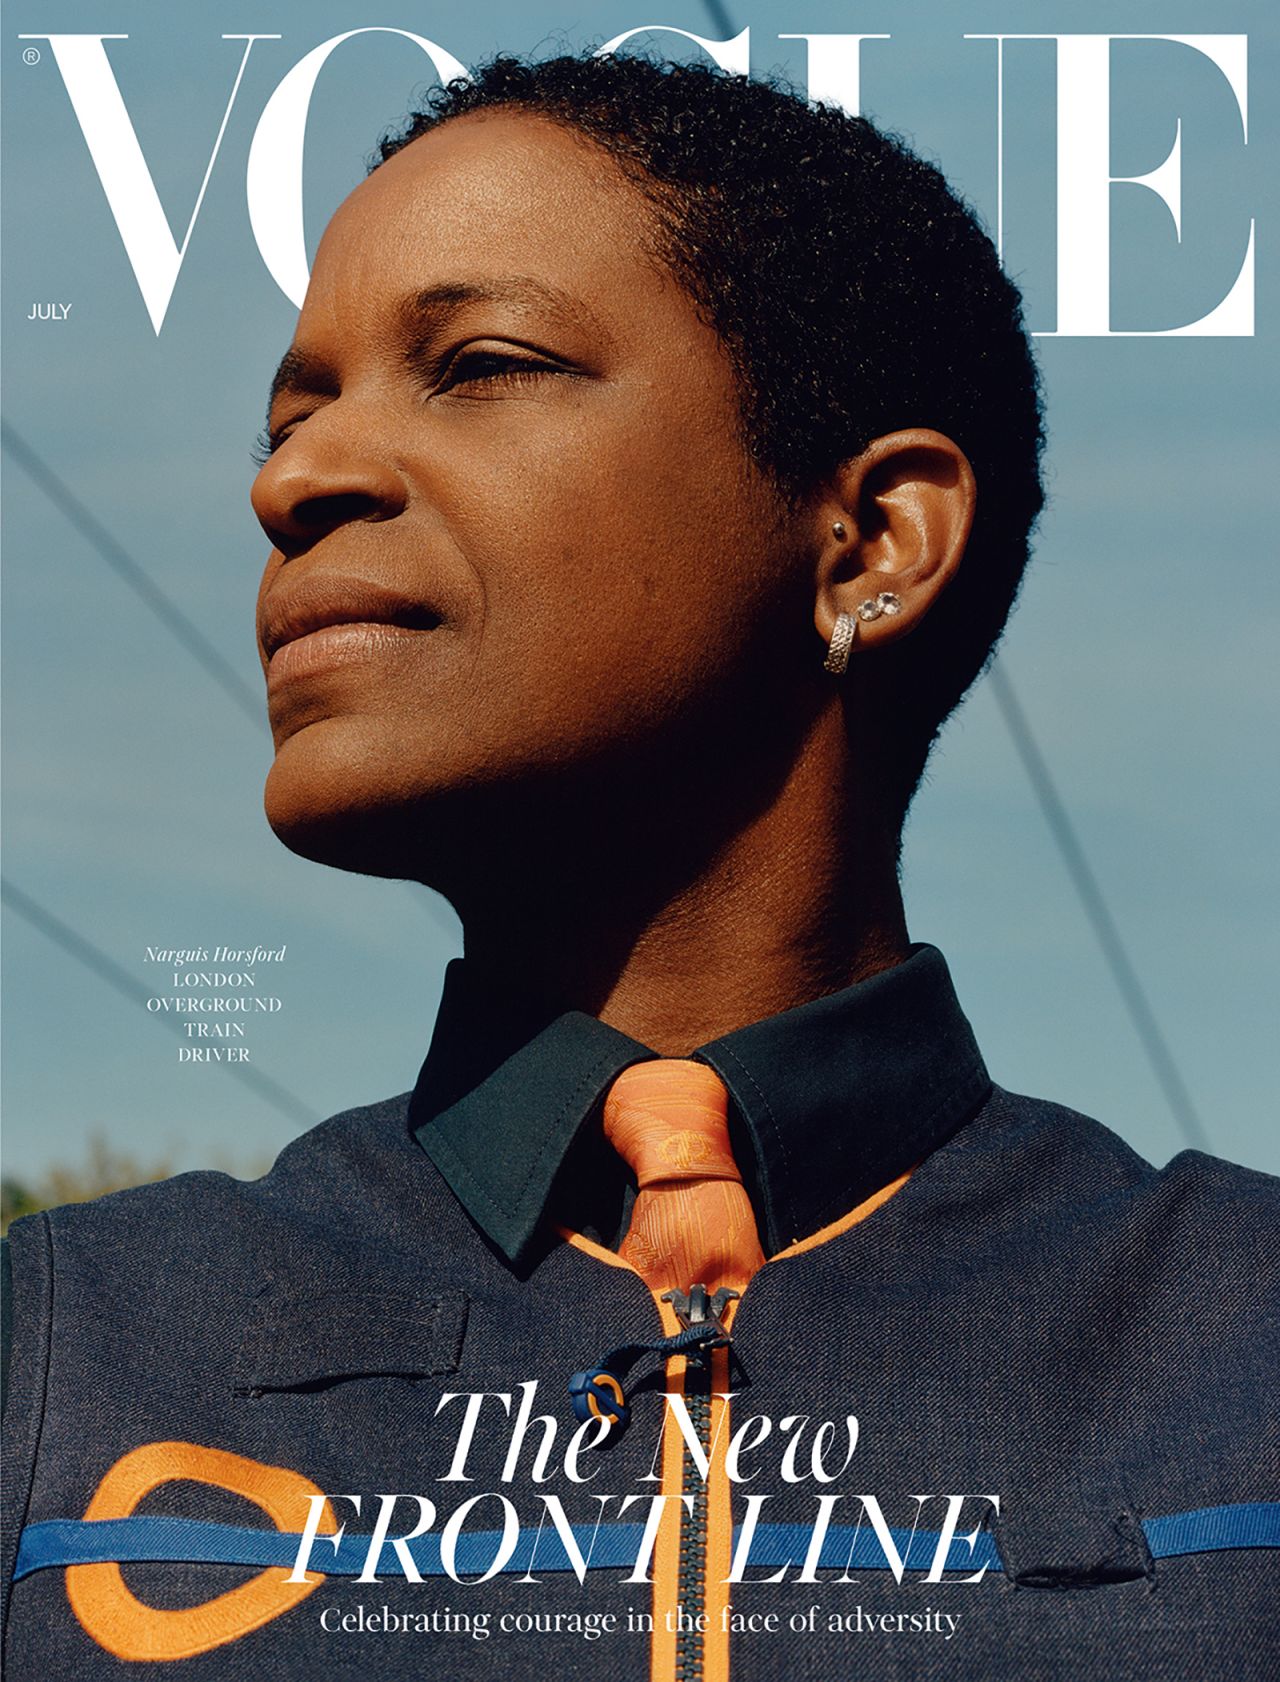 British Vogue editor-in-chief Edward Enninful put a community midwife, a train driver and a supermarket worker on the cover of the magazine's July 2020 issue.